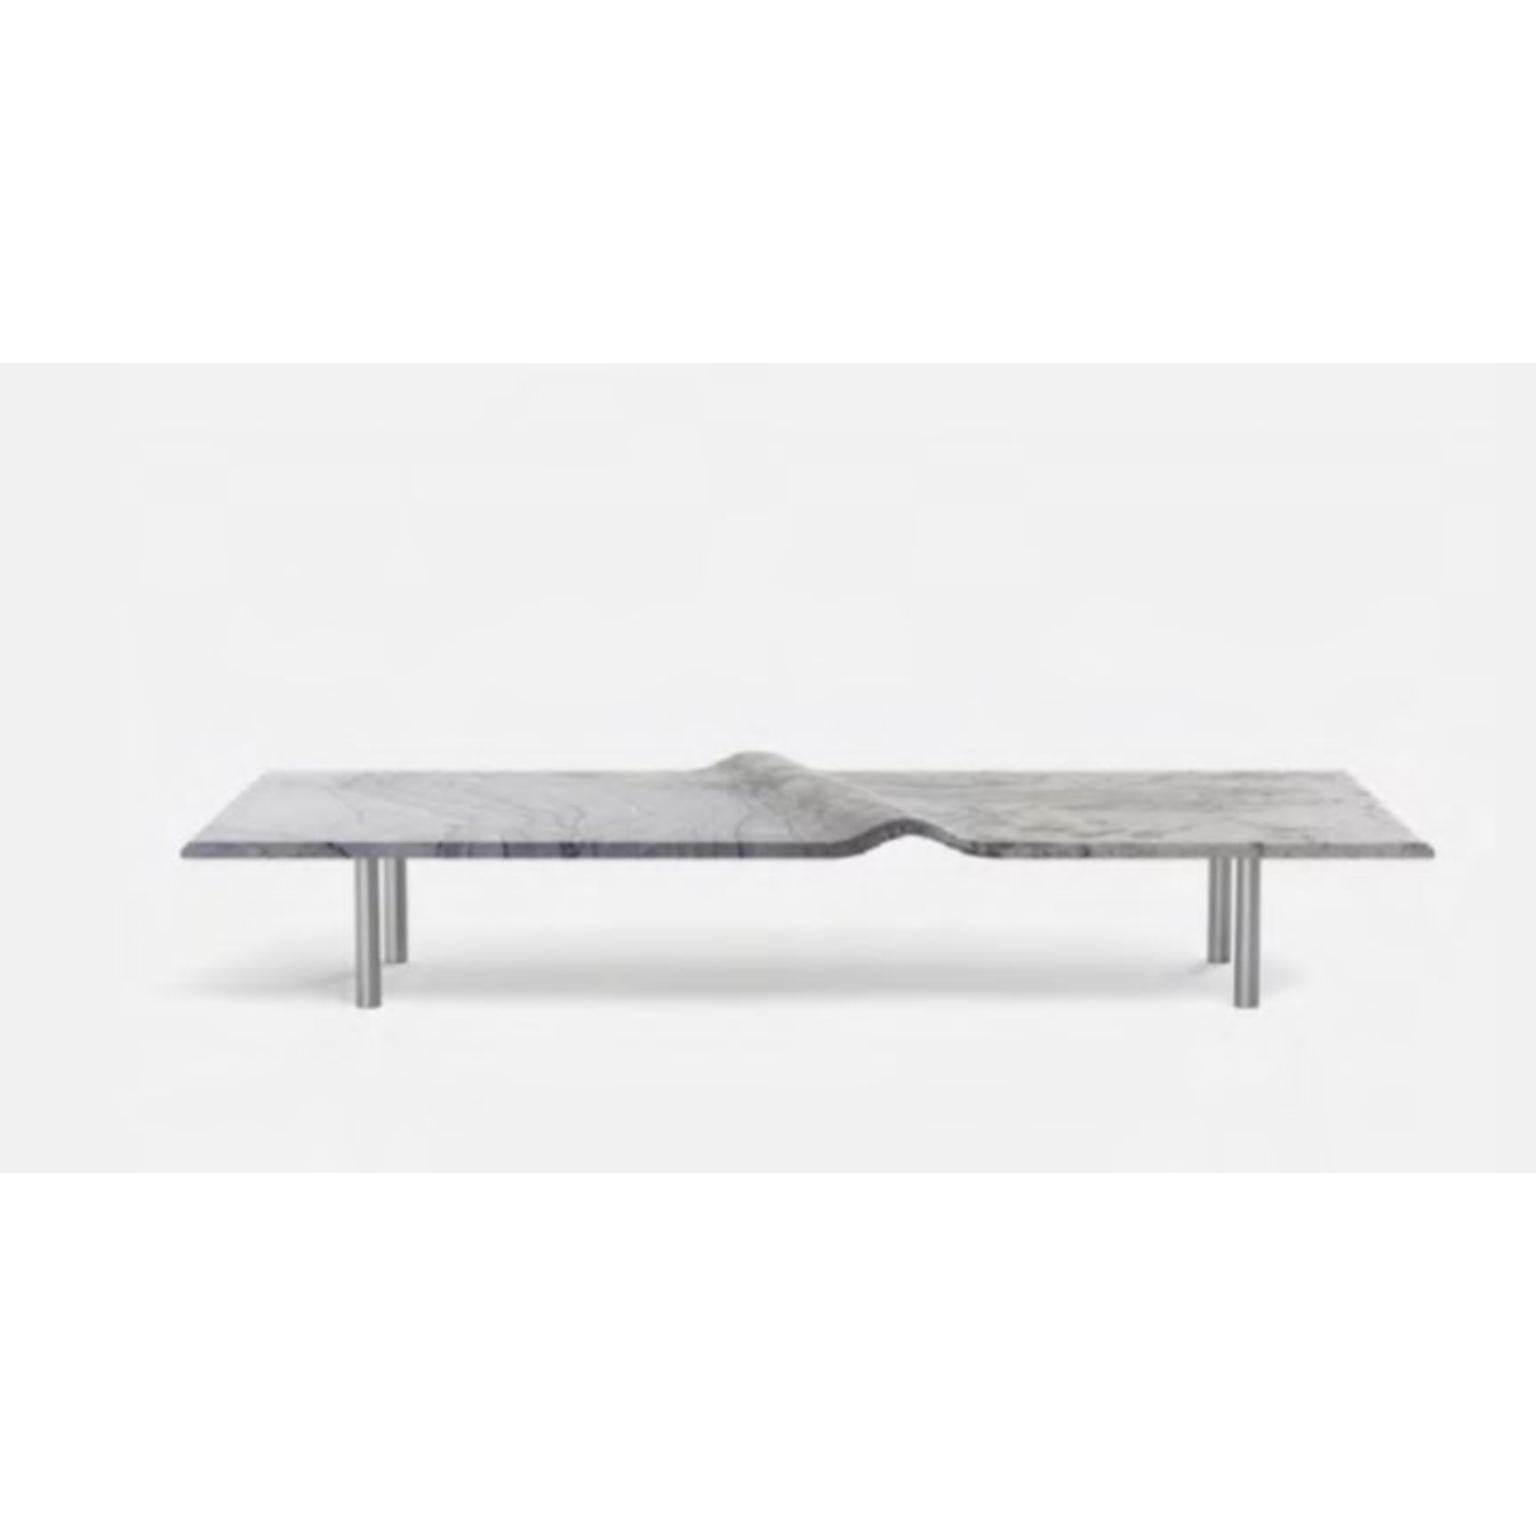 White Onda Coffee Table by Wentz
Dimensions: D 80 x W 160 x H 28 cm
Materials: Granite/Quartzite, Steel/Stainless Steel.

The Onda Center Table is associated with the image of the sea. The sculpture in the granite stone creates the perfect curve –